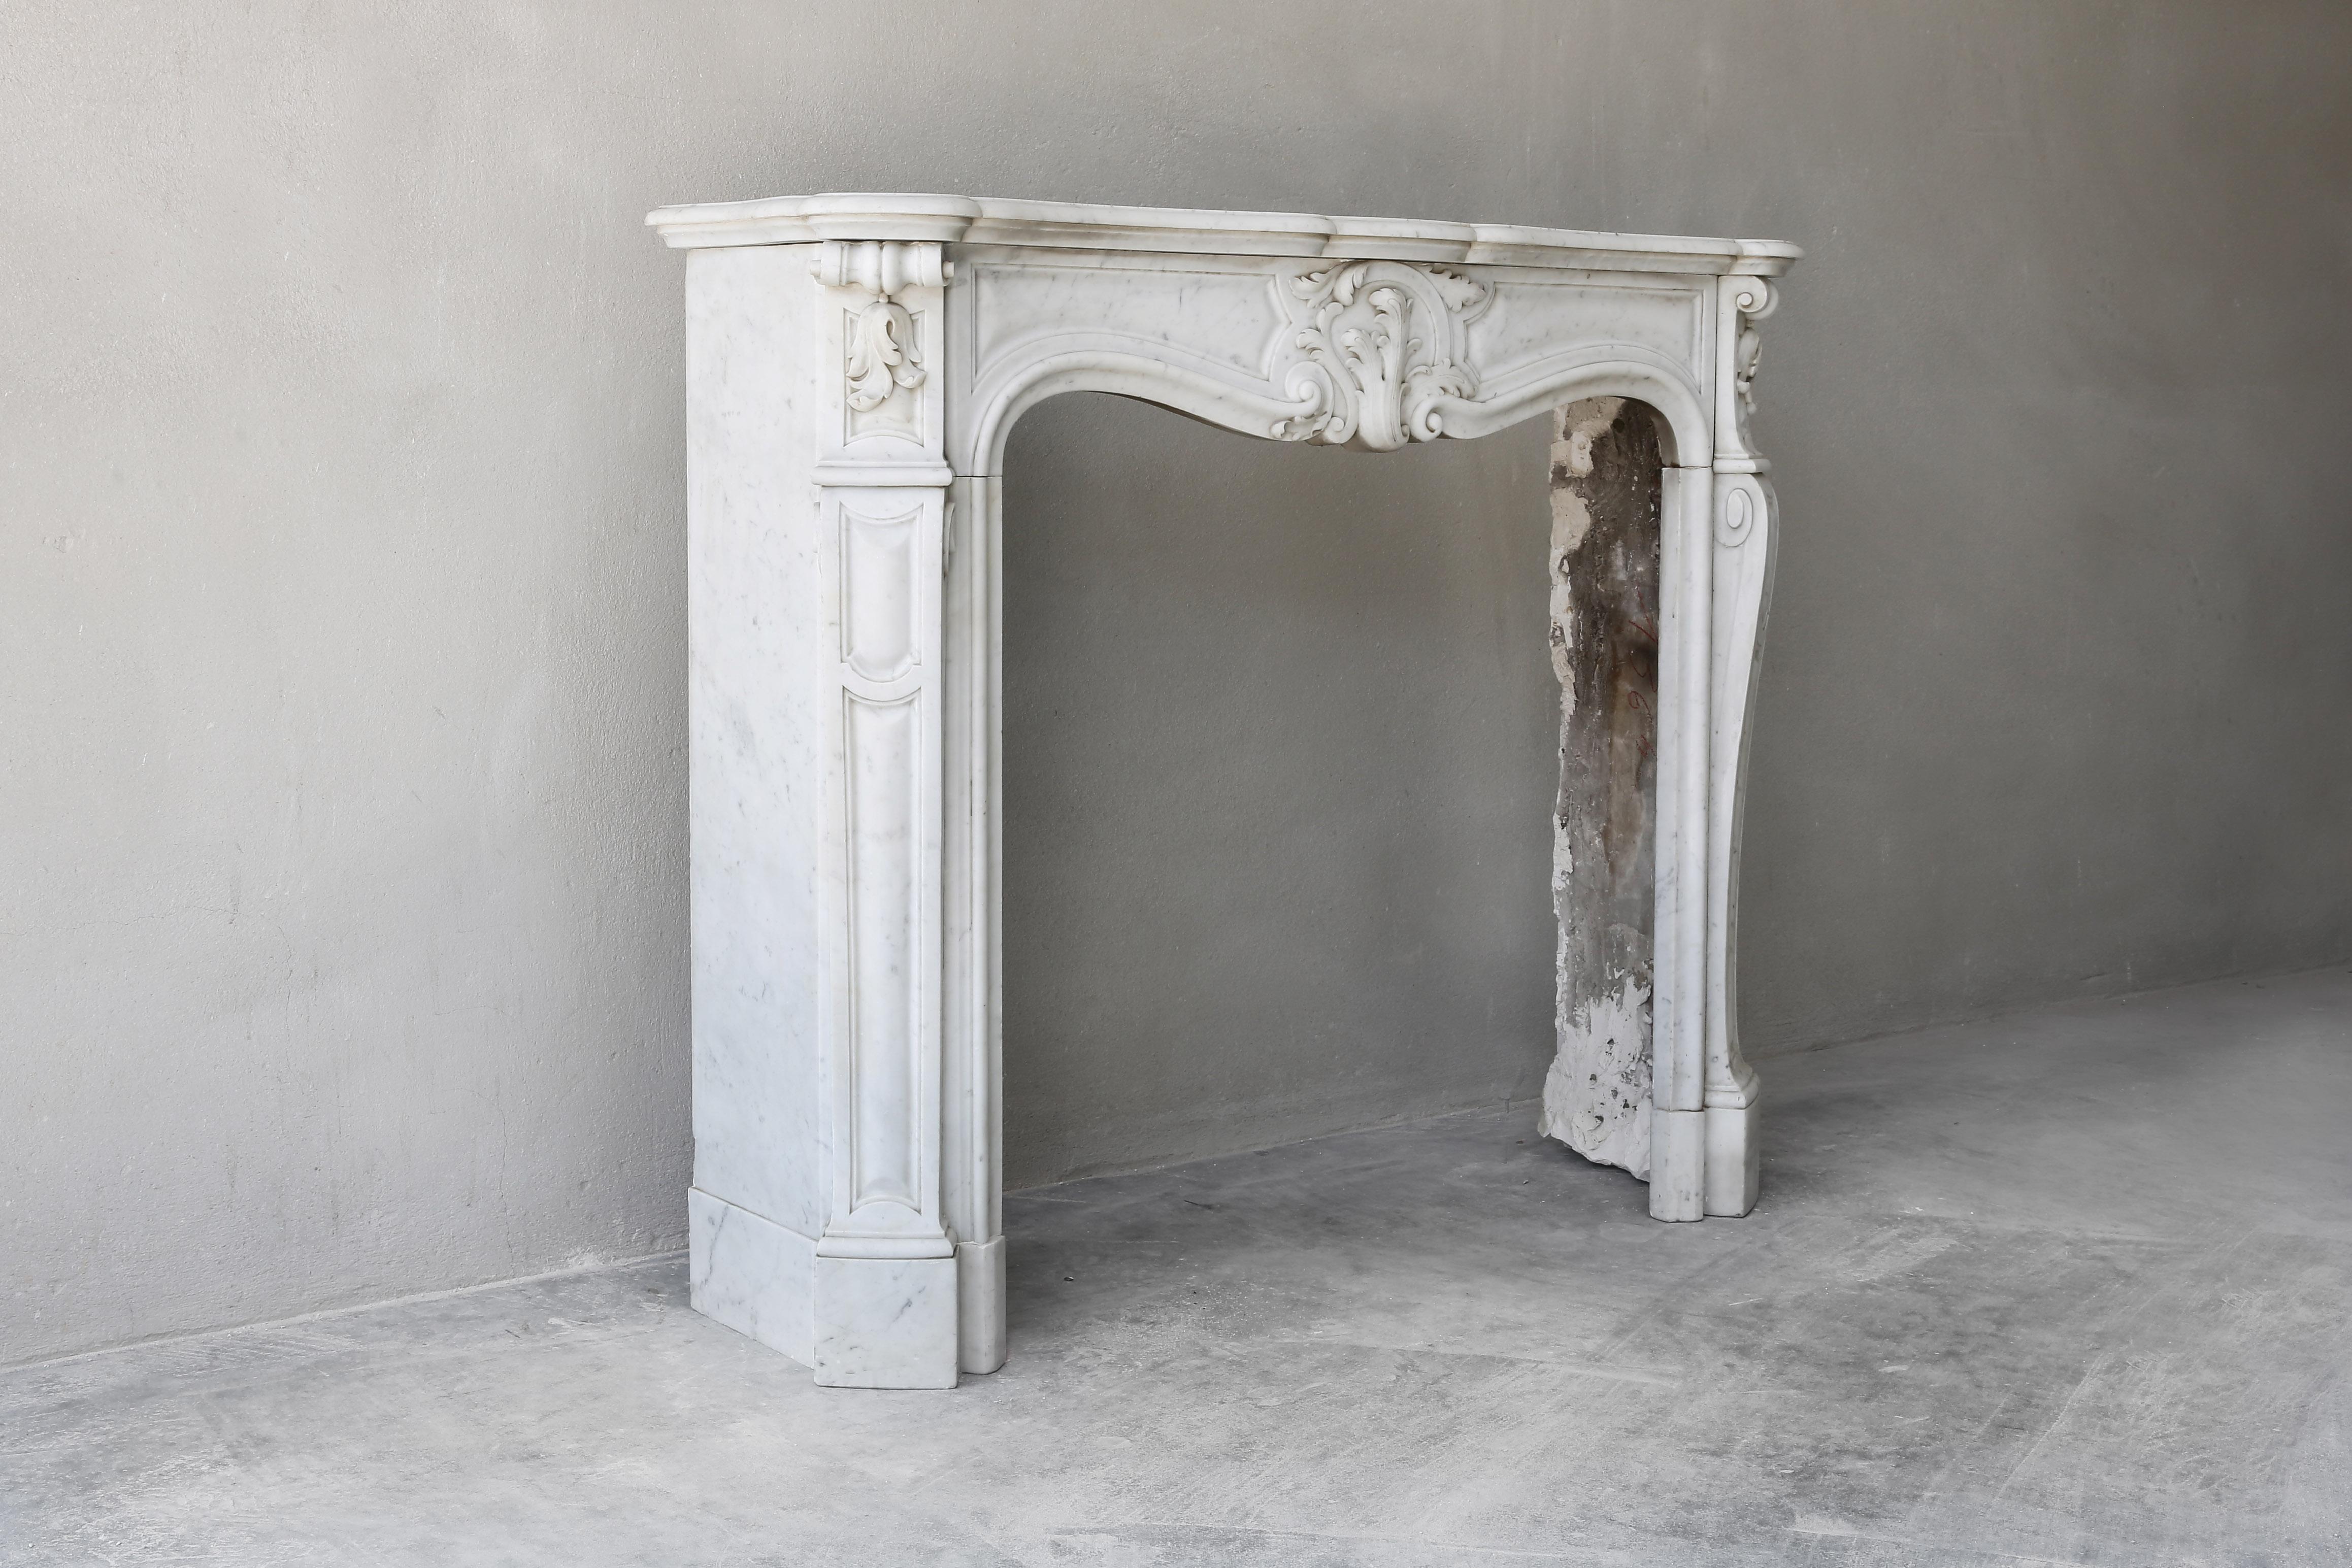 Beautiful antique fireplace of white marble. This marble type is Carrara and comes from Italy. We have various antique mantelpieces of Carrara marble in stock in our warehouse. The chimney is in the recognizable style of Louis XV and dates back to